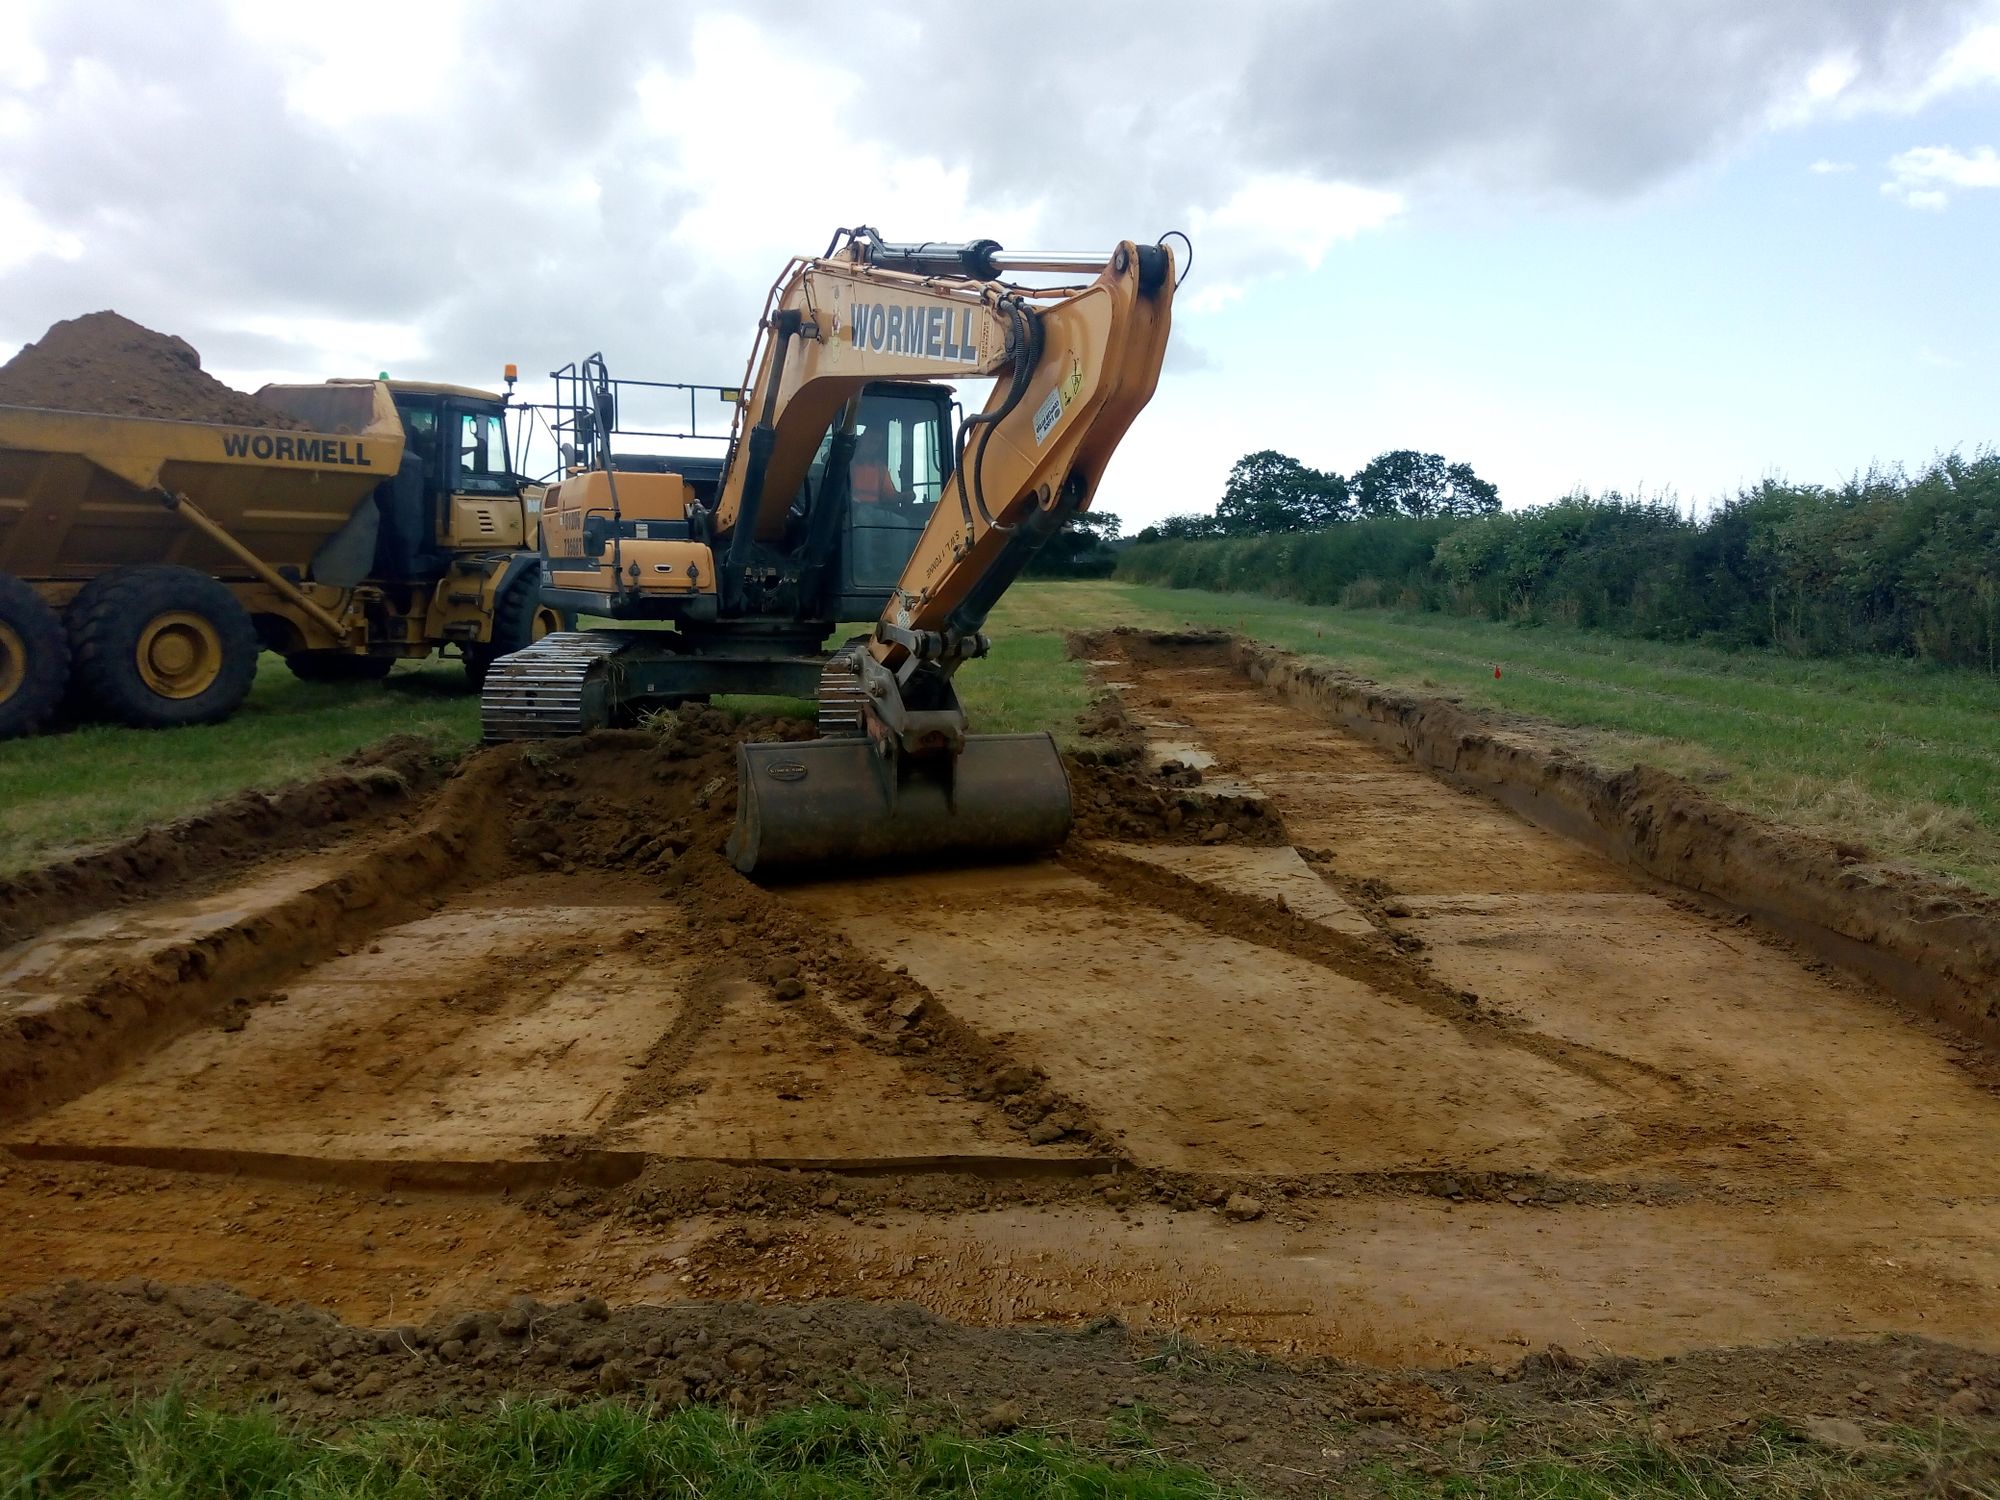 A digger arm peels back the subsoil from the excavation area, with a dumper truck behind.